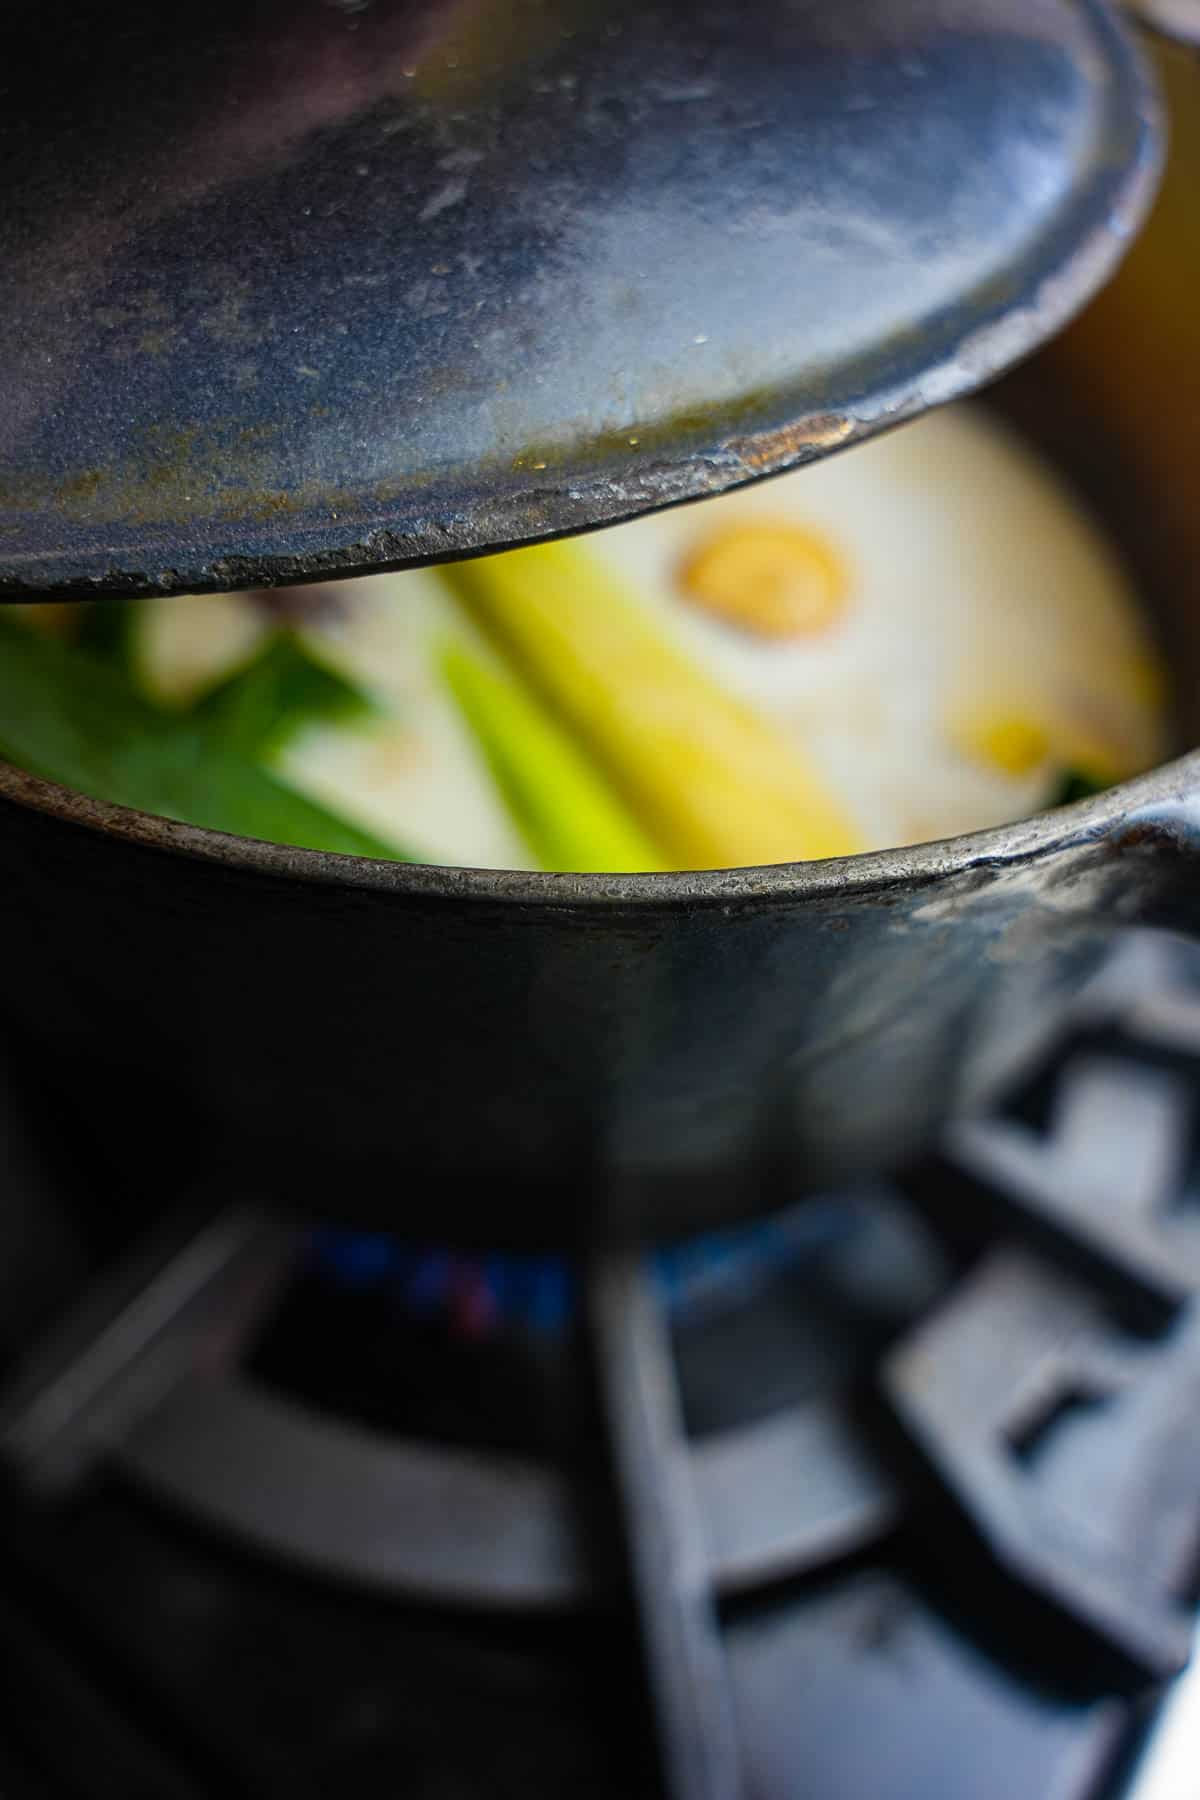 A lid is placed onto the cooking ingredients in a blue colored pot on the stove.